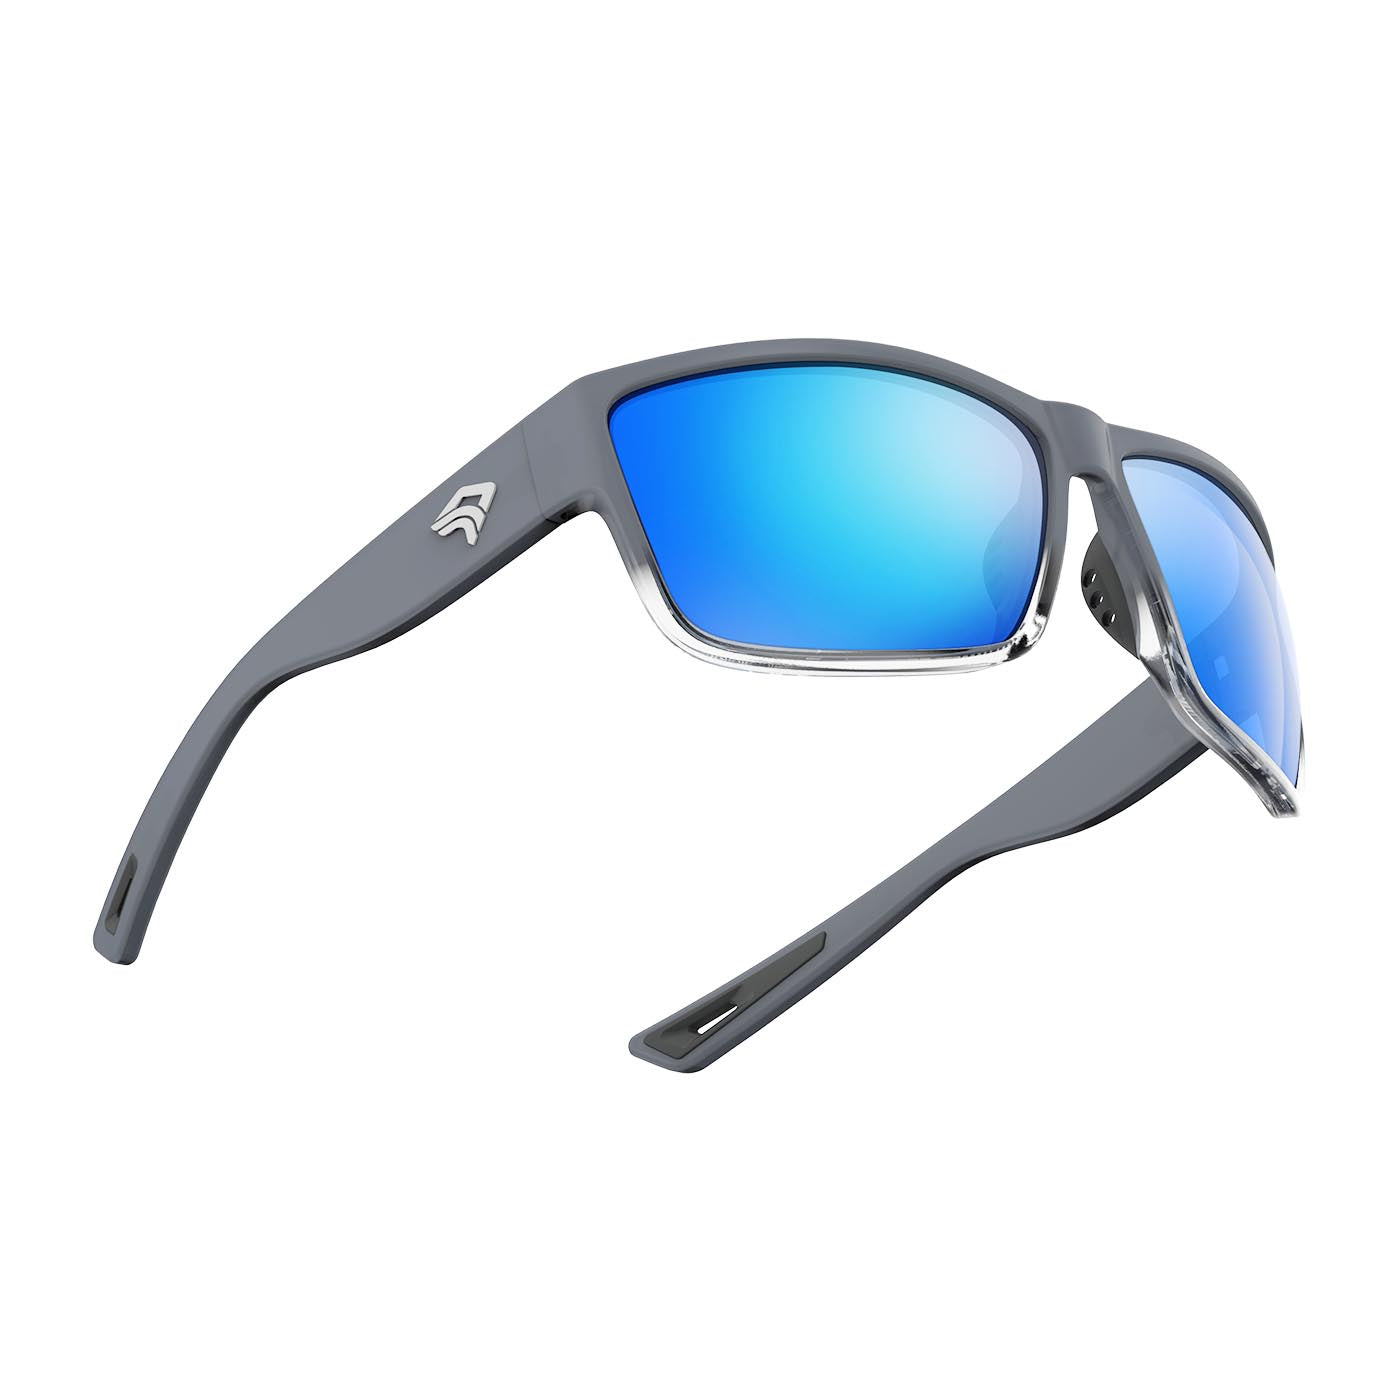 Grey Women - Cycling, and Running, Pure and Warranty Ideal for Men Matte - Transparent Polarized and Golf, To Fishing Sports Ideal Sunglasses - for Lifetime Frame Flexible Adjustable with Half -